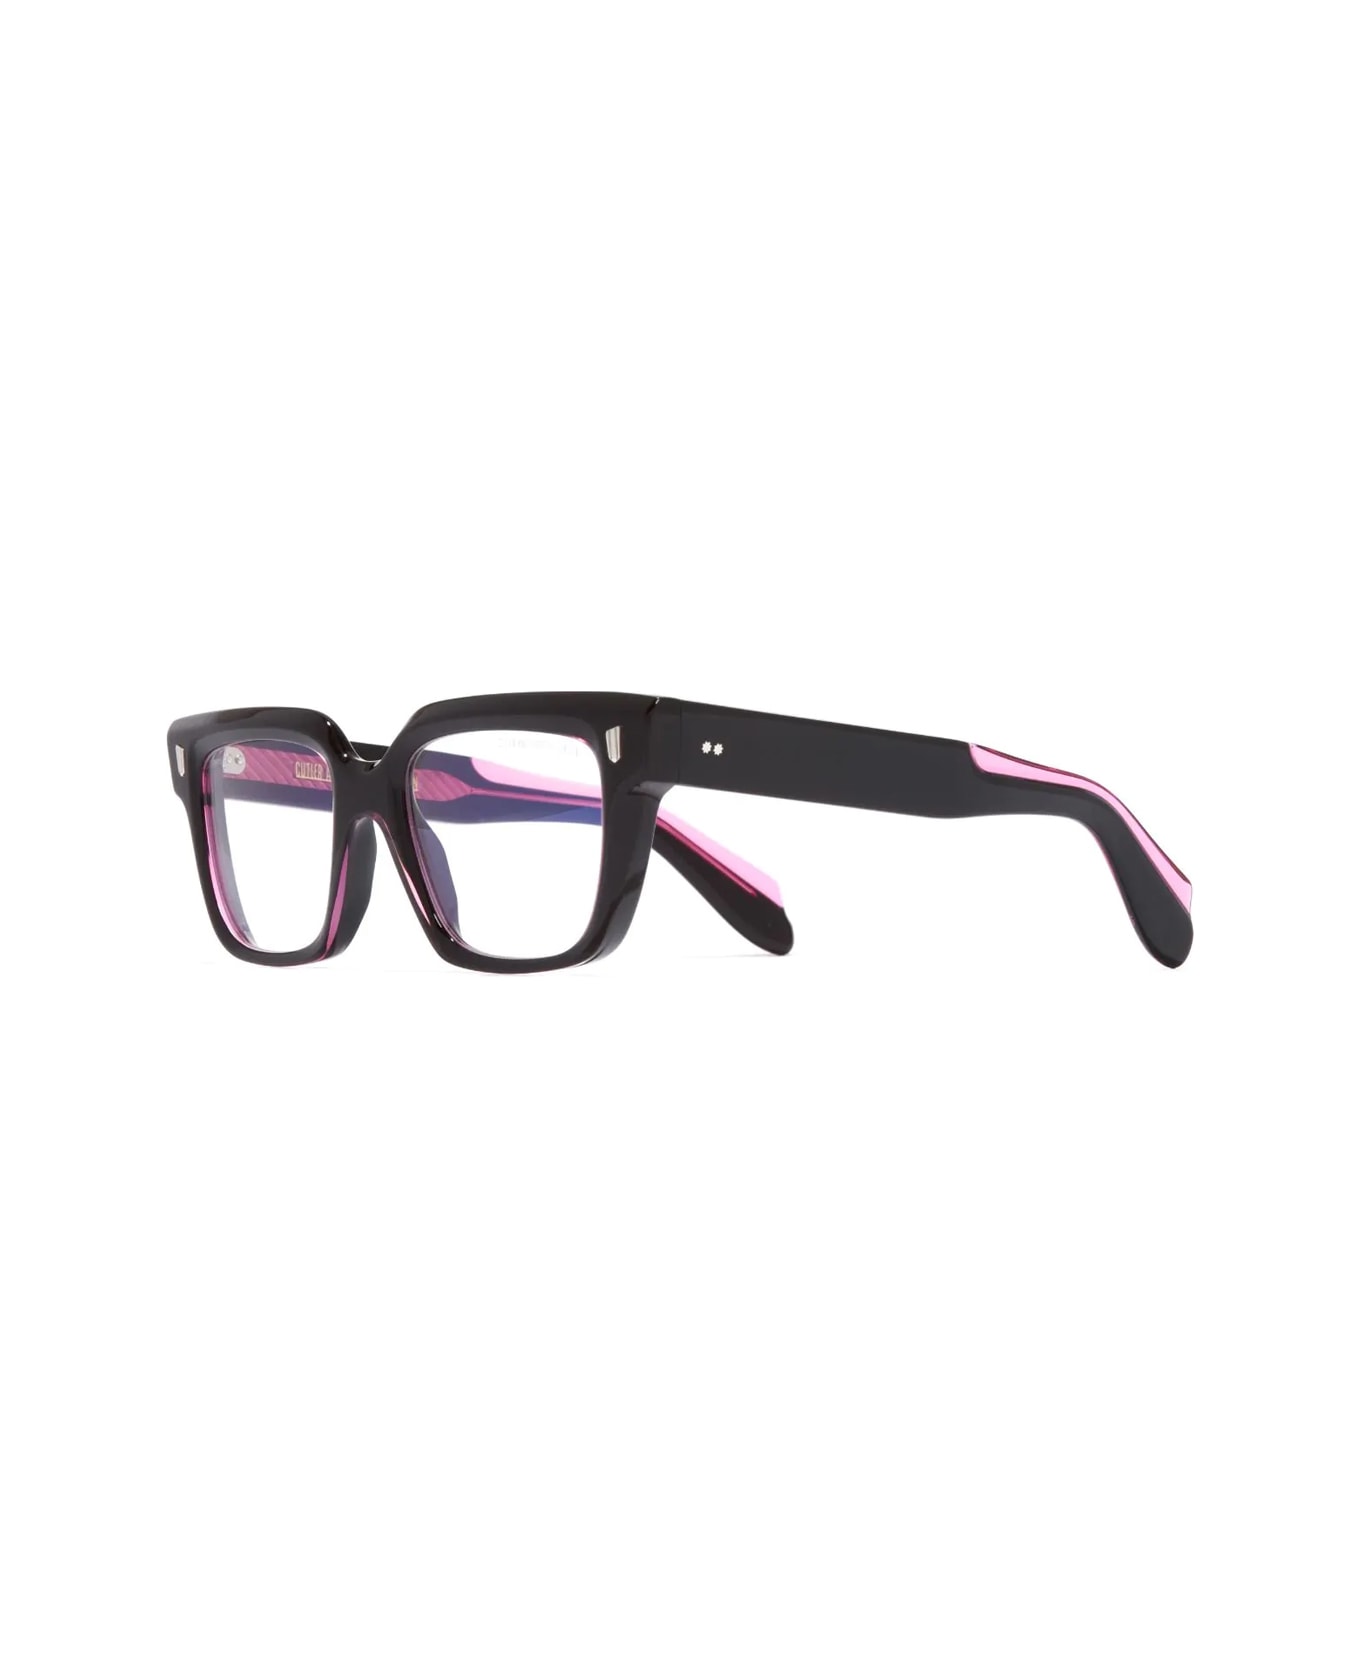 Cutler and Gross 9347 01 Glasses - Nero